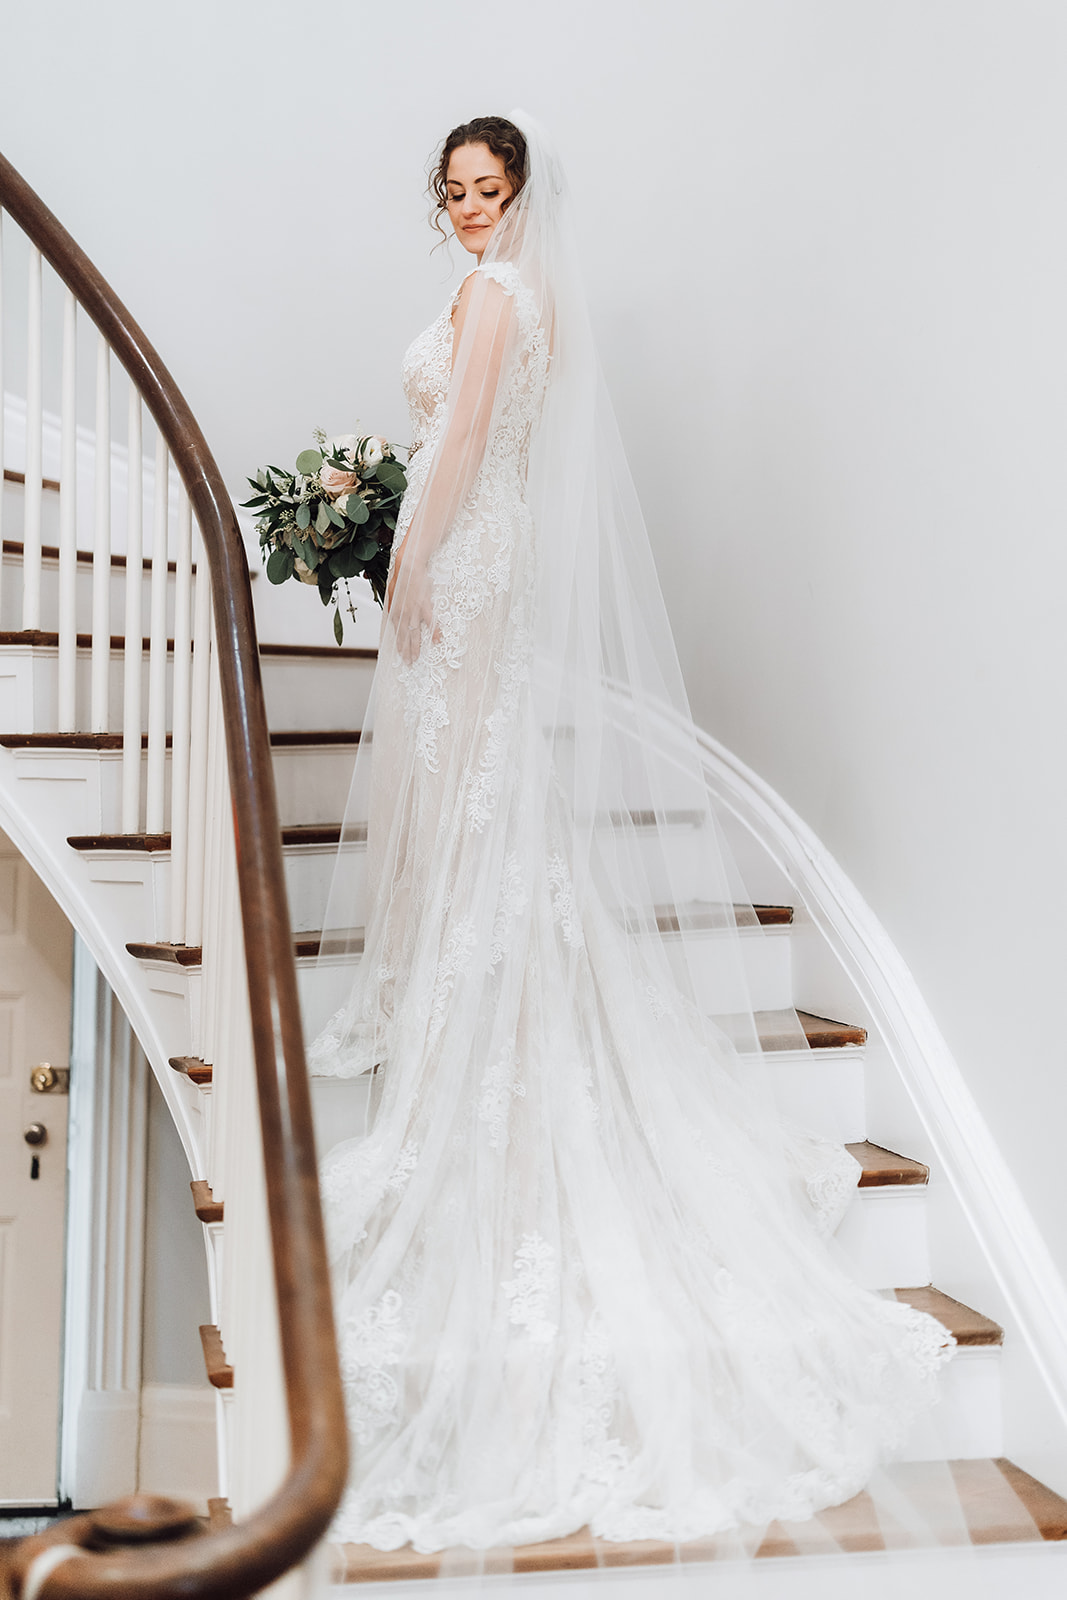 A bride looks down her long train and veil draped down a set of curved stairs Ravenswood Mansion